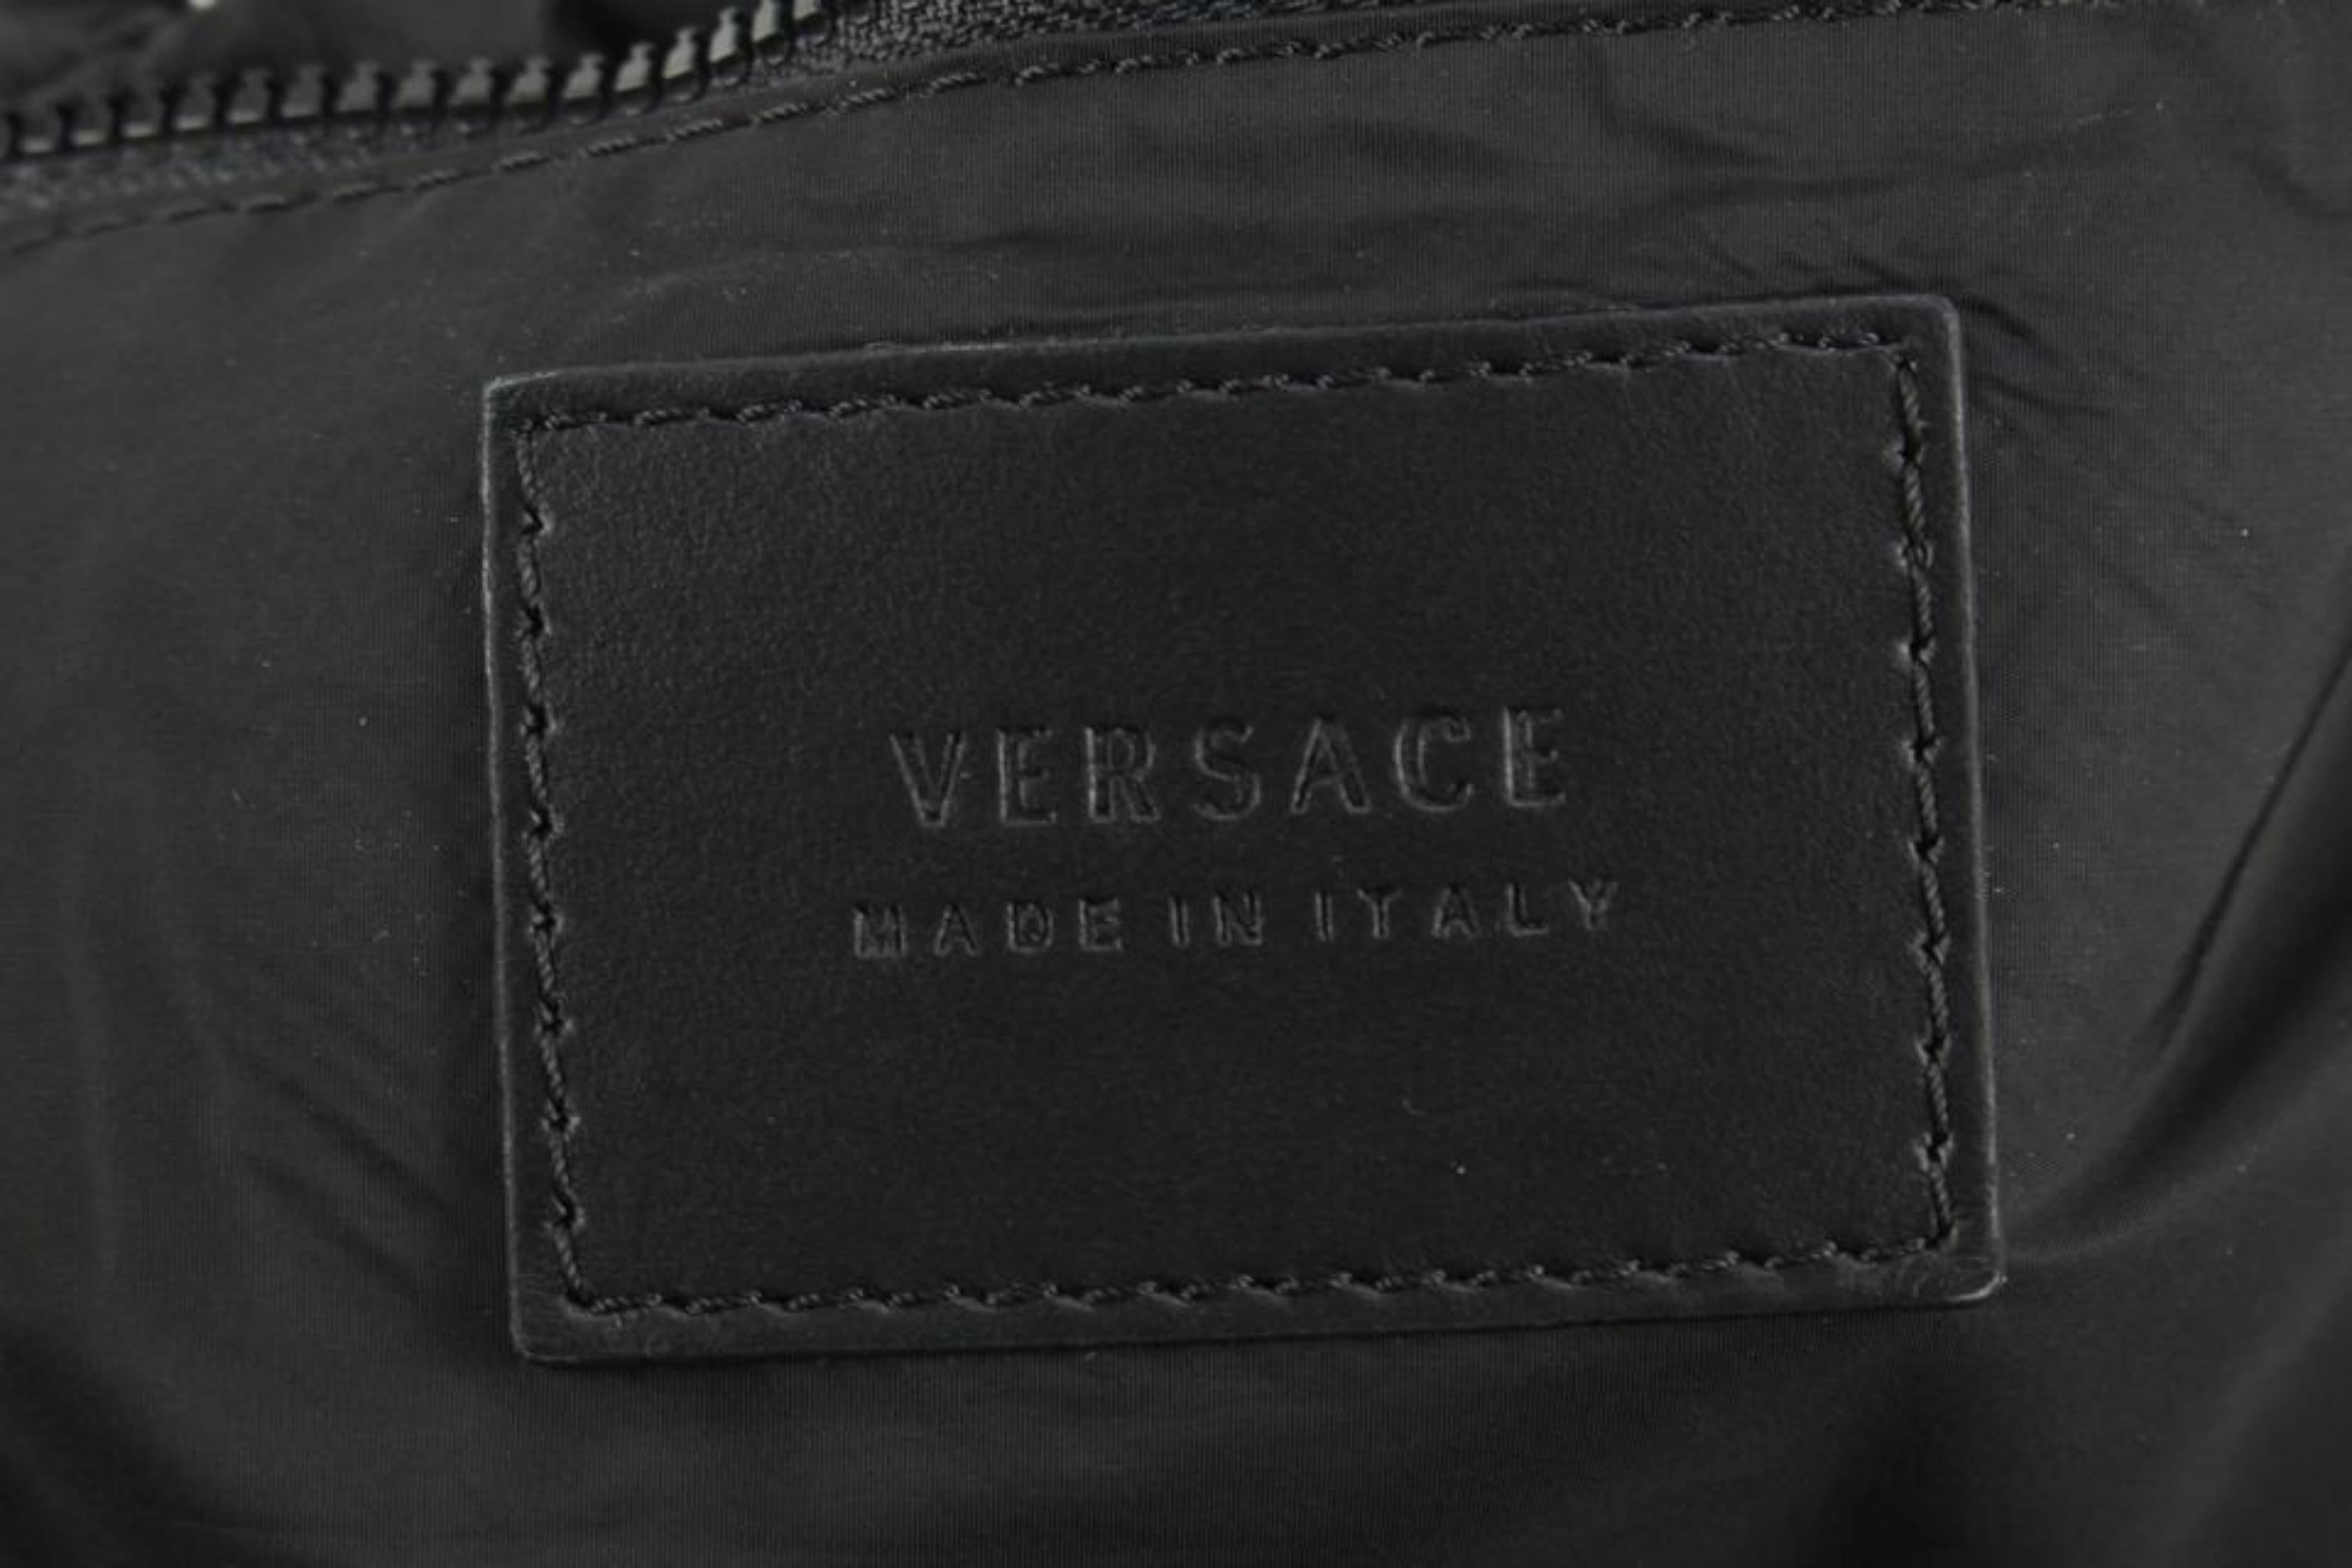 Versace DFZ5350  $975 Blue Zaino Stampa Logo Nylon Backpack Travel Bag 39v54s In Good Condition For Sale In Dix hills, NY